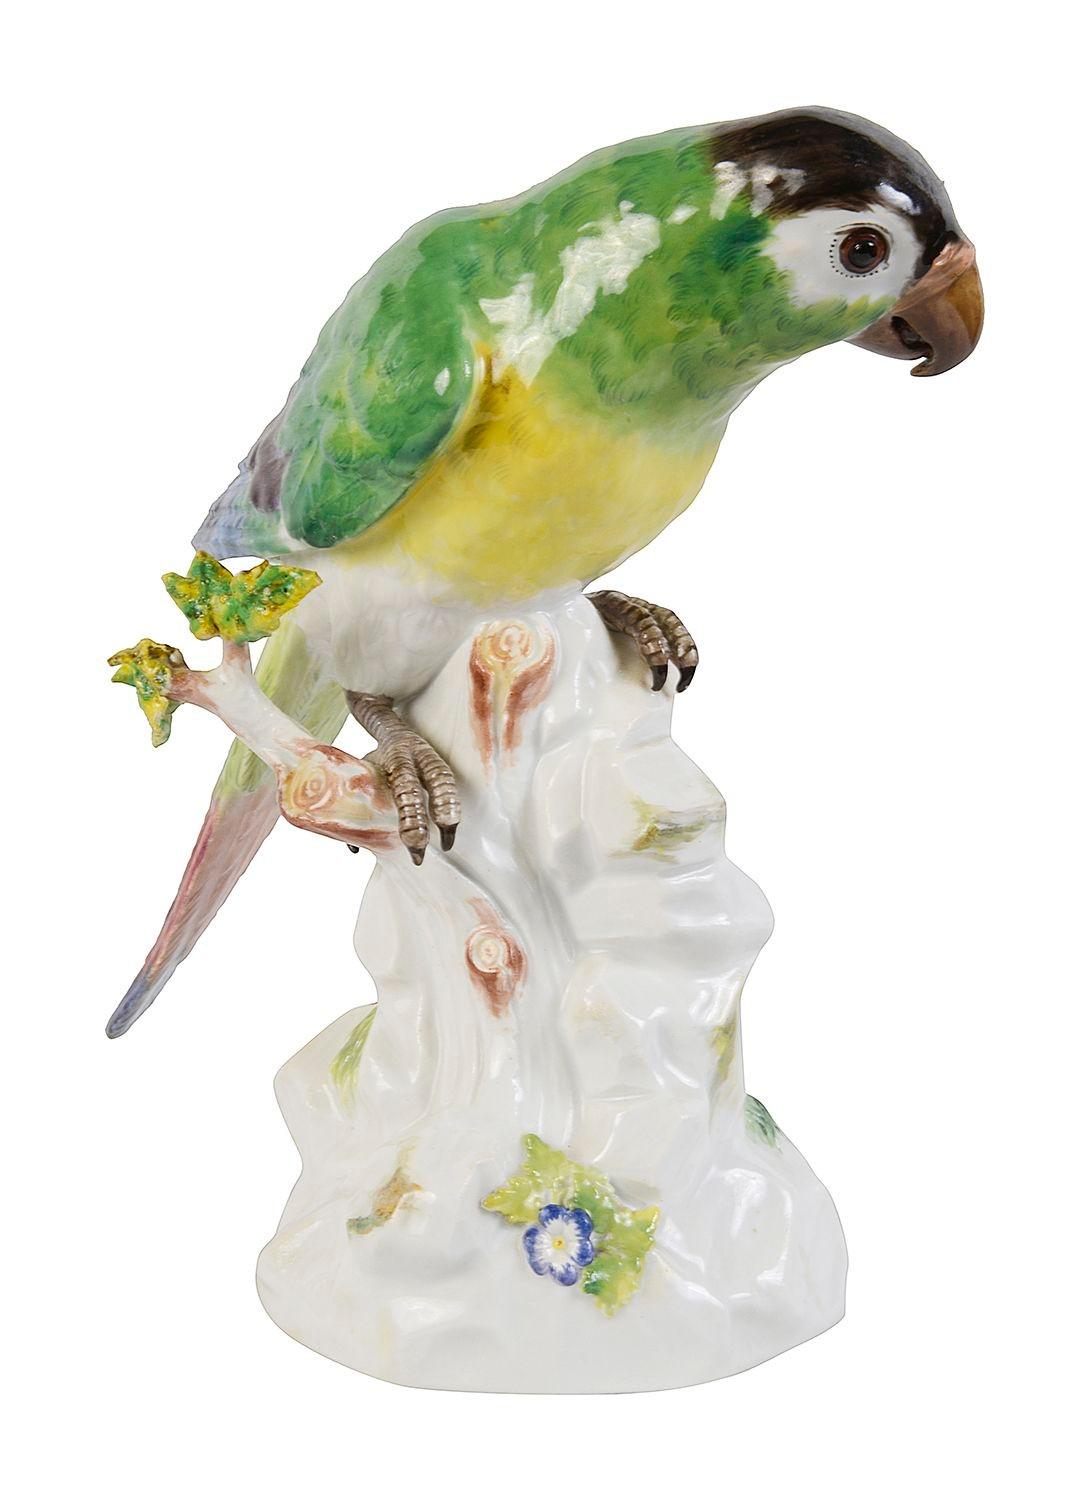 Meissen porcelain Parrot, late 19th Century, having wonderful bold colouring, perched on a tree trunk, blue crossed swords signed to the base.

Batch 76 YNKZ. G100038/23